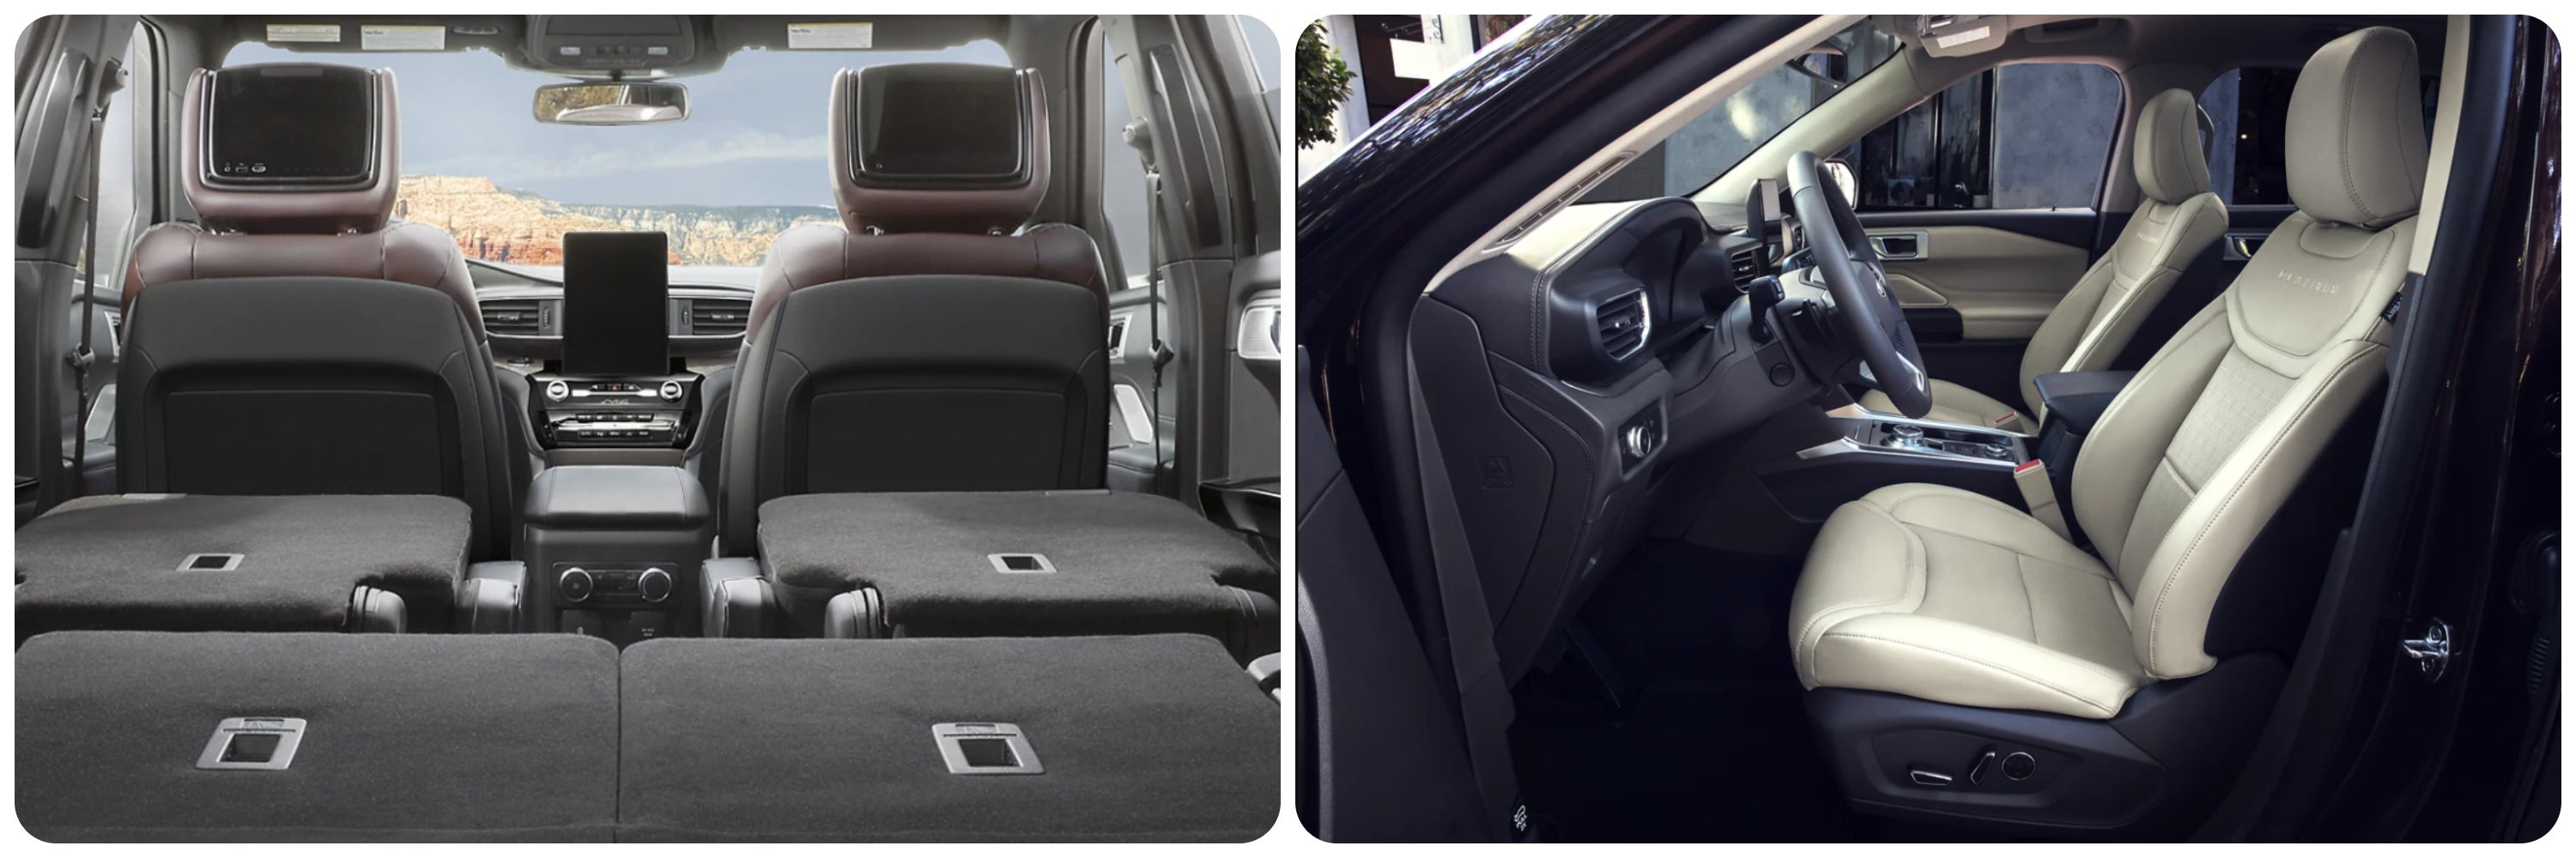 On the left the cargo hold of a 2023 Ford Explorer, and on the right a view of the interior cabin of a 2022 Ford Explorer